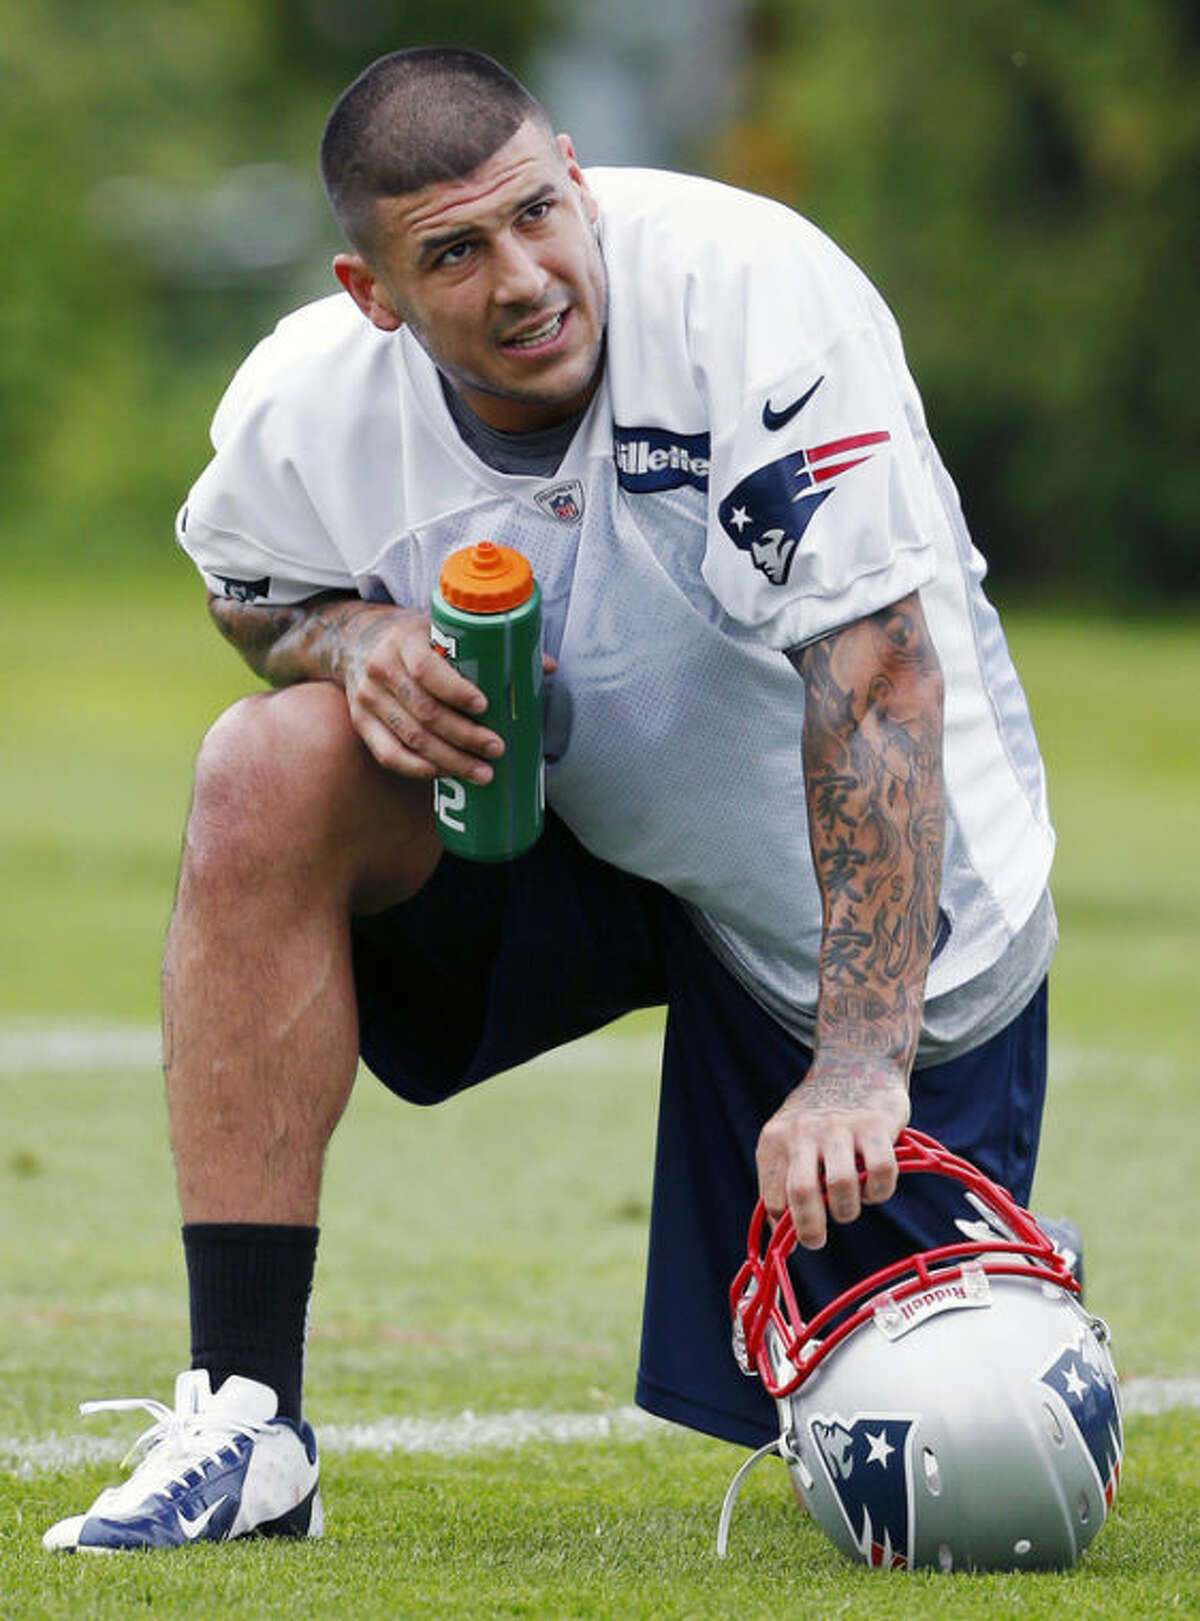 FILE - In this May 29, 2013, file photo, New England Patriots' Aaron Hernandez kneels on the field during NFL football practice in Foxborough, Mass. A Massachusetts court has sealed documents related to the killing of a semi-pro football player found dead a mile from Hernandez's home. Attleboro District Court officials said Tuesday, June 25, 2013 that documents related to the case, including search warrants, have been impounded, meaning the public can?’t see them. No charges have been filed. (AP Photo/Michael Dwyer, File)